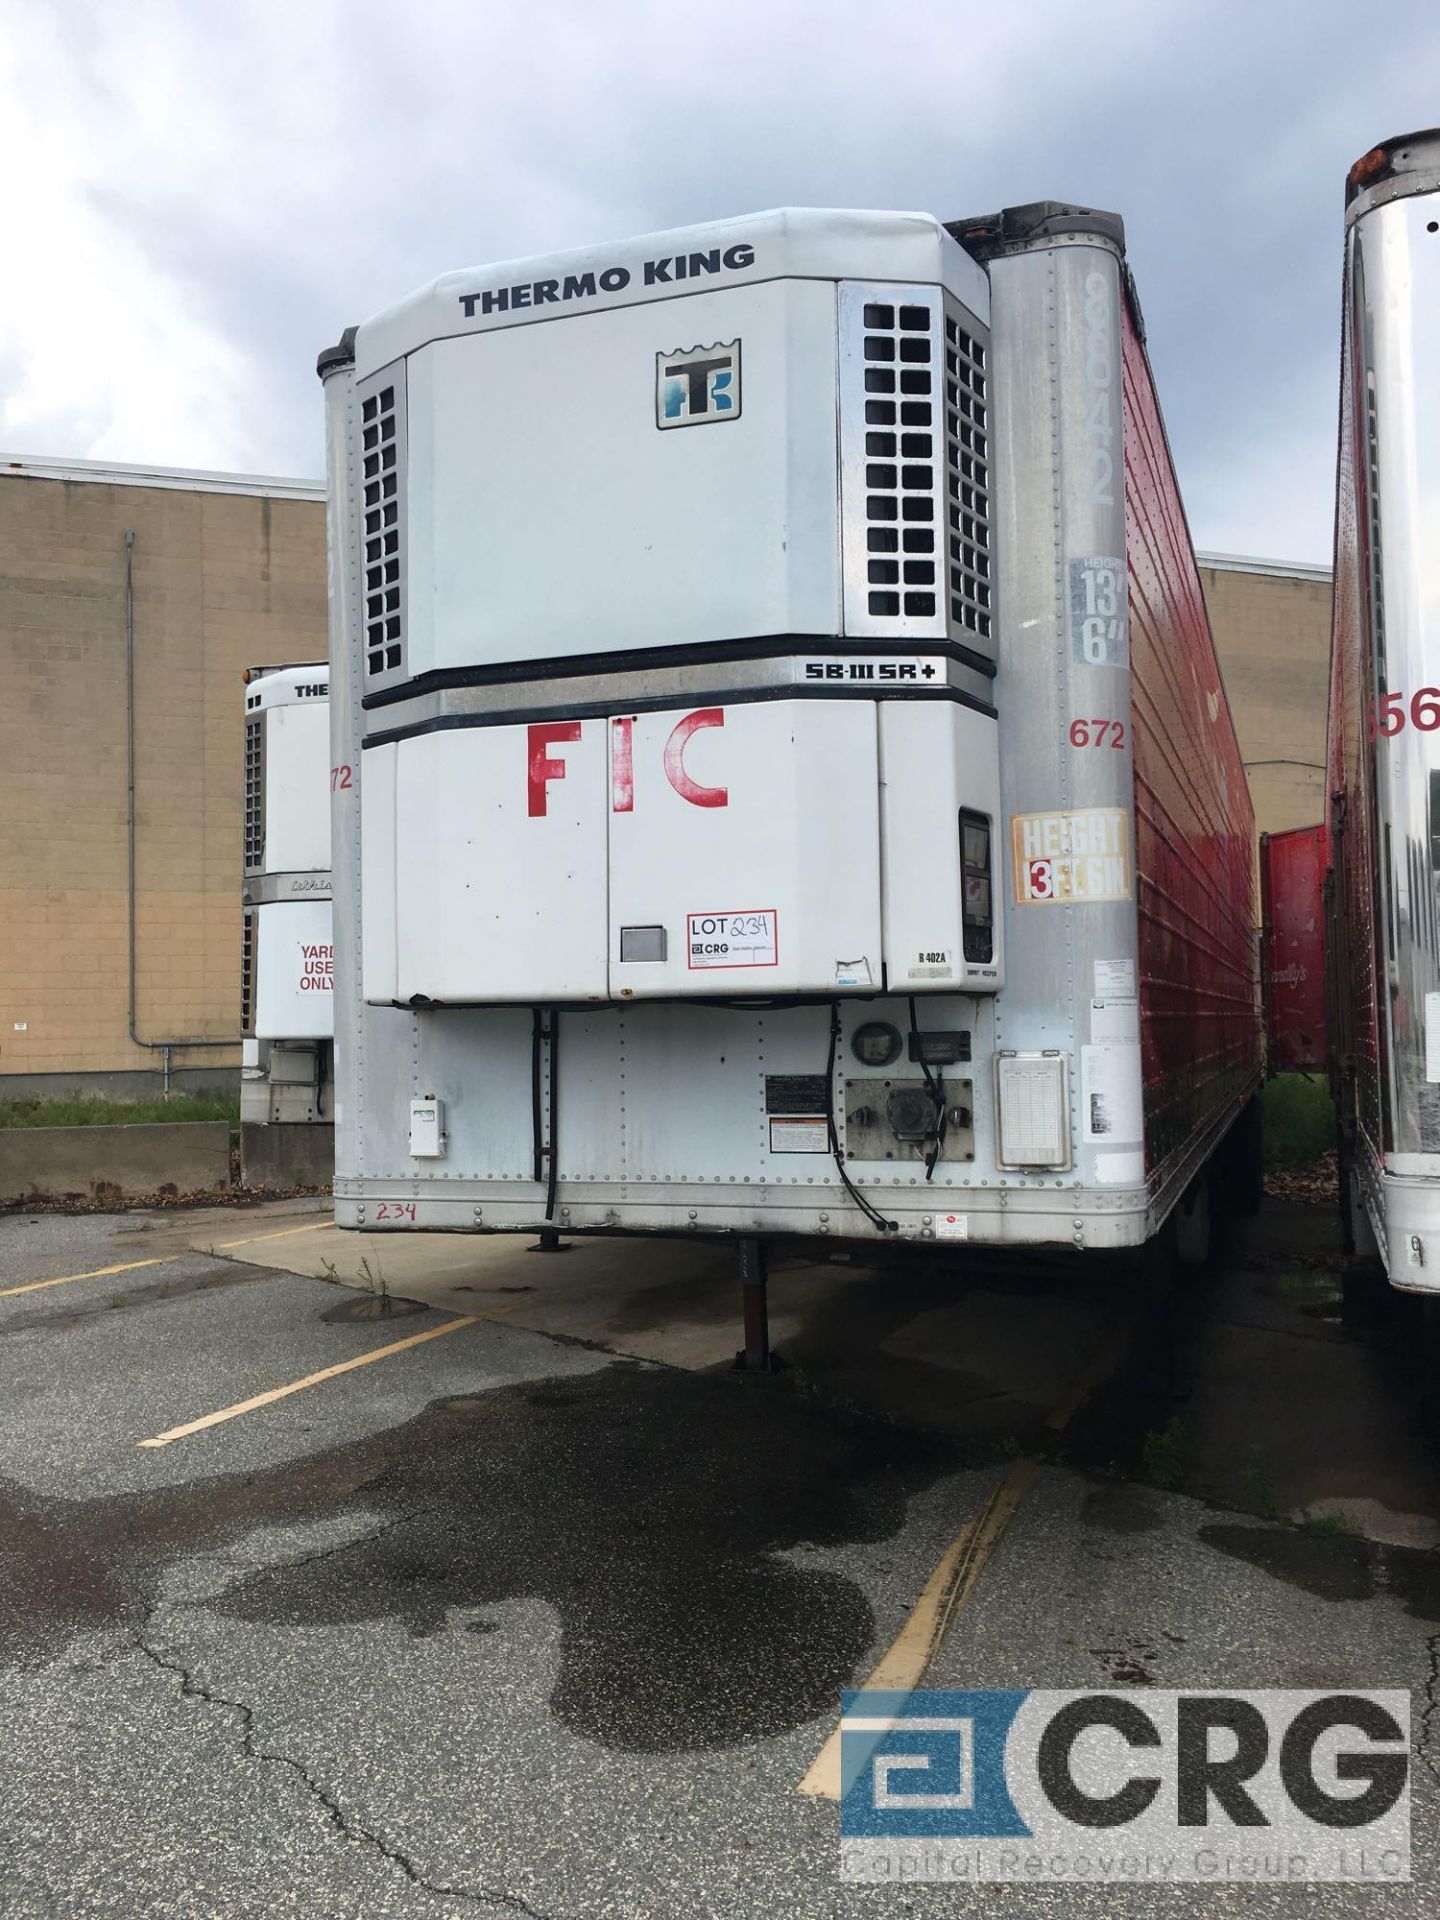 Multi Temp Refrigerated Semi Trailer - 48 Lomg, 96" wide, Thermo King SBIII TCI-SR, n/s hours, 6 - Image 2 of 3